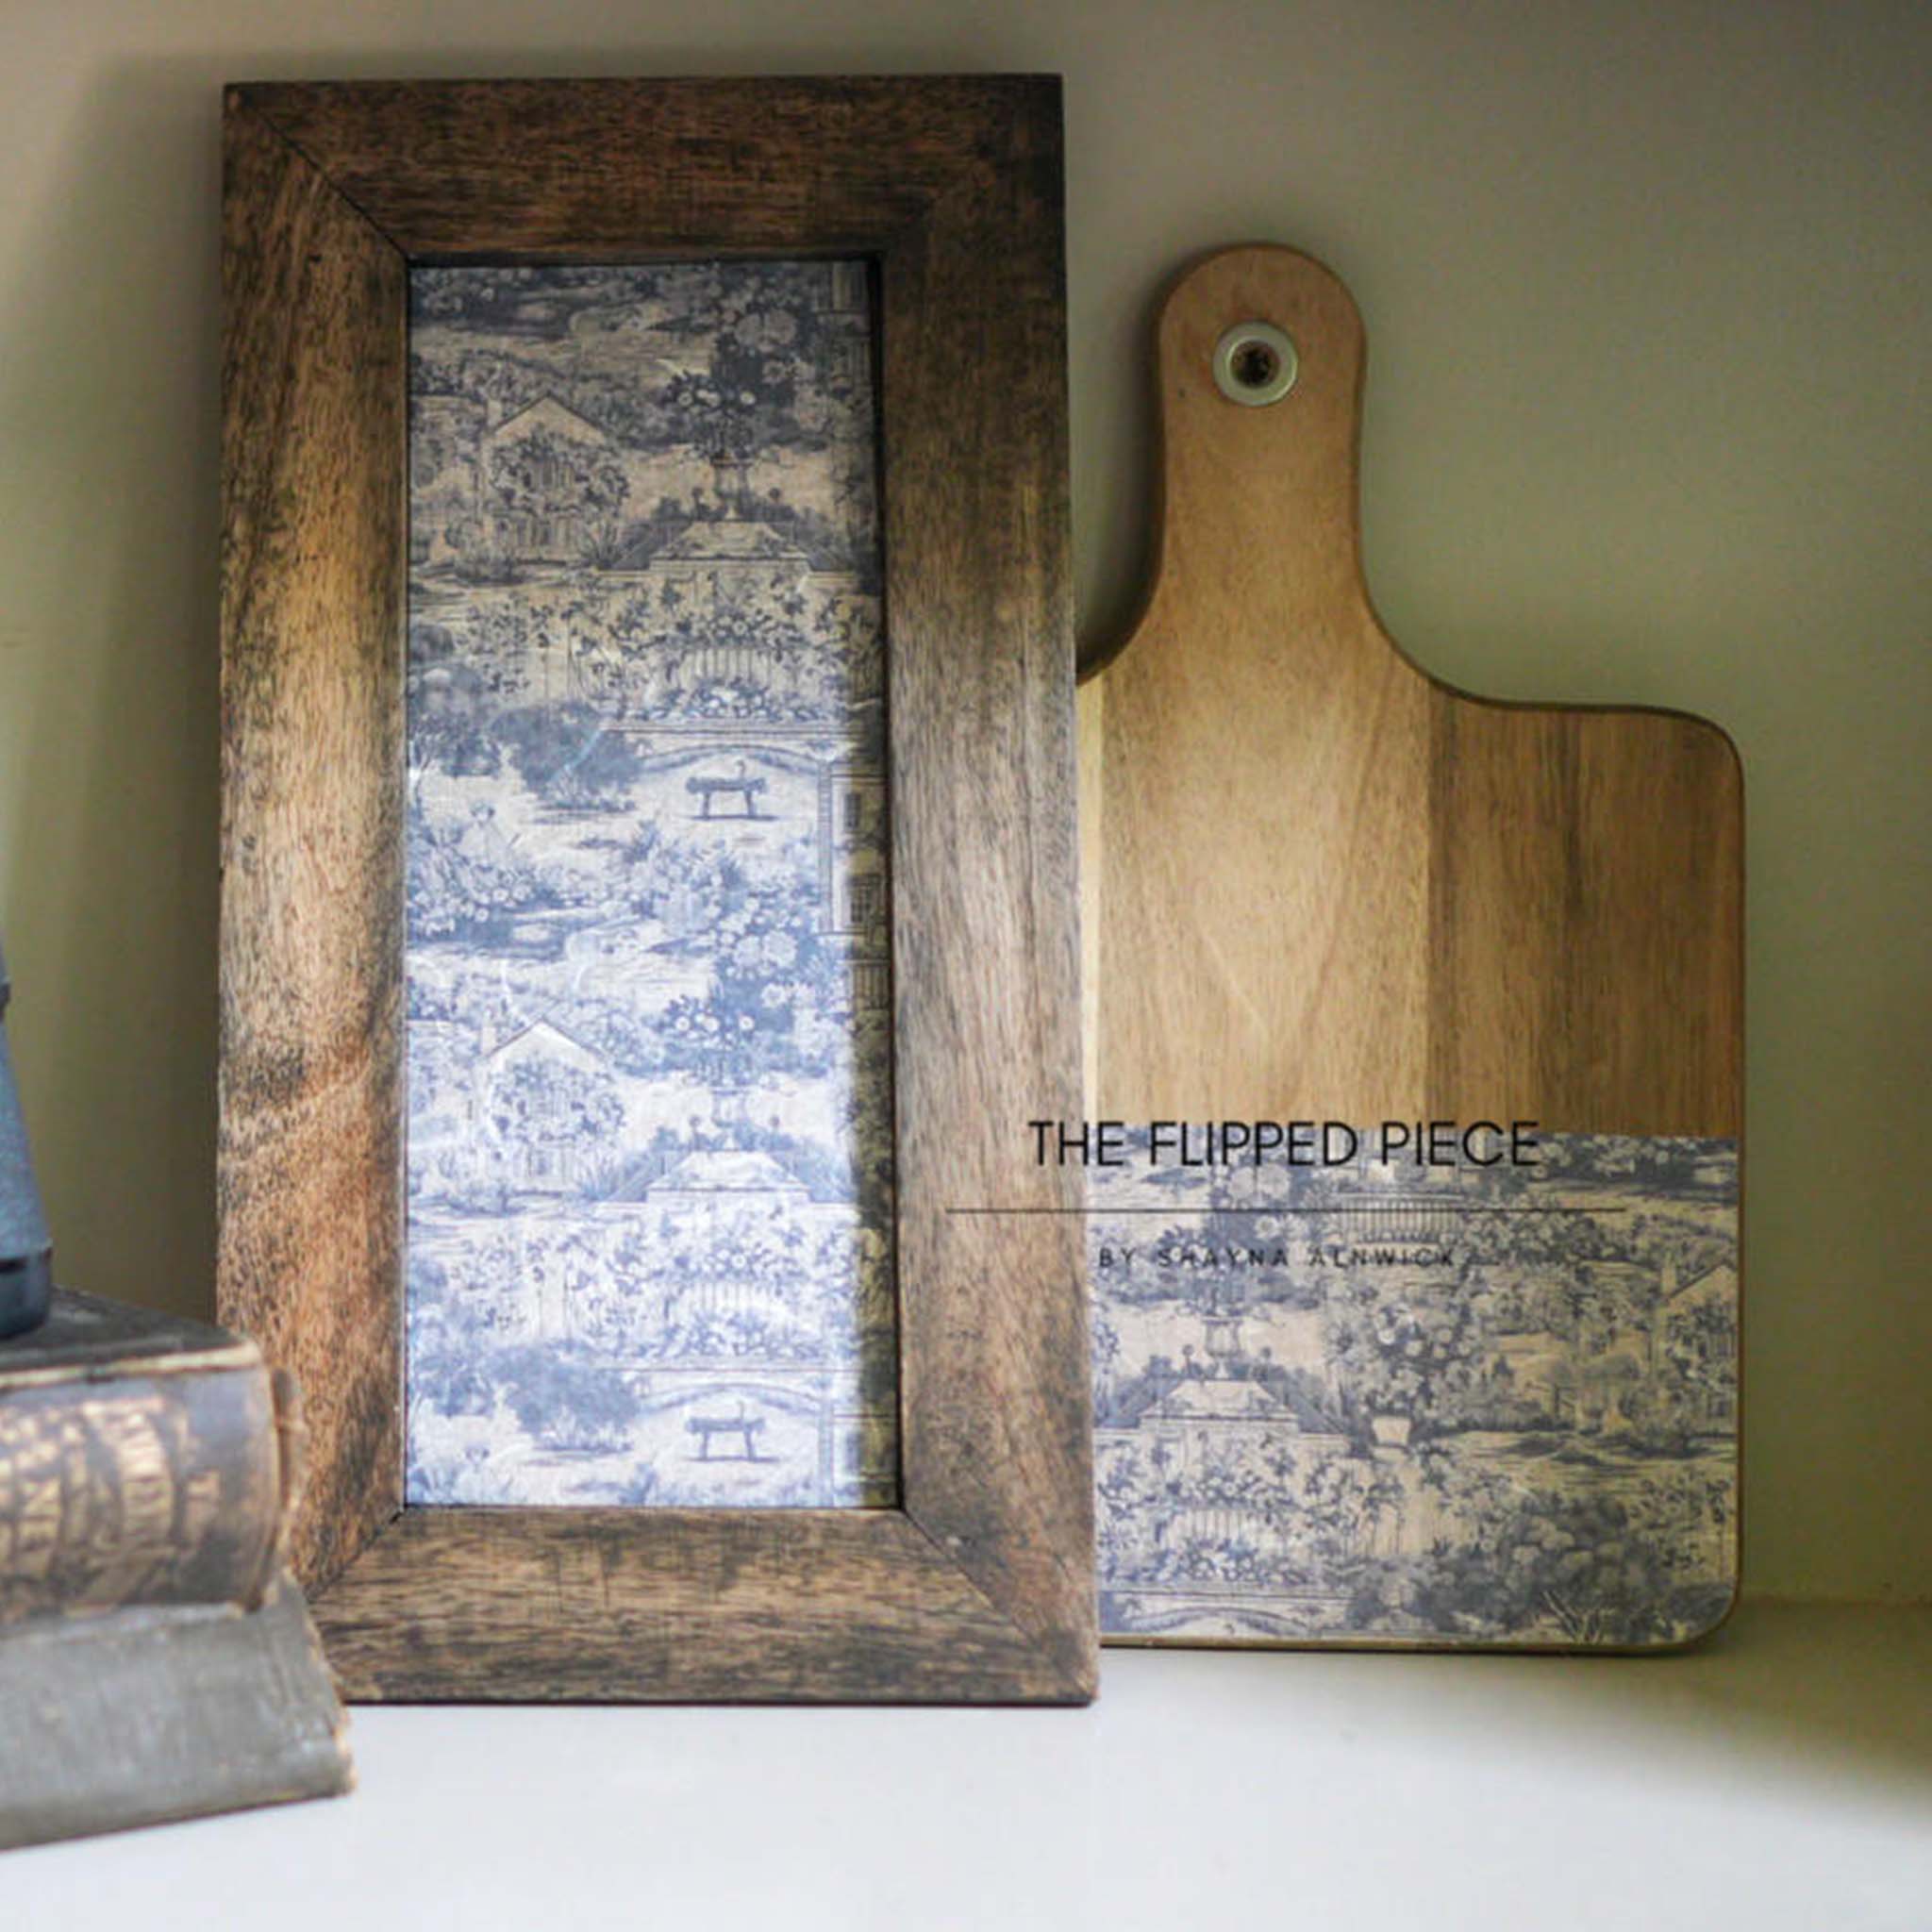 A wood cutting board and cabinet door decor refurbished by The Flipped Piece features Belles and Whistles' Ming Vase A3 rice paper on them.